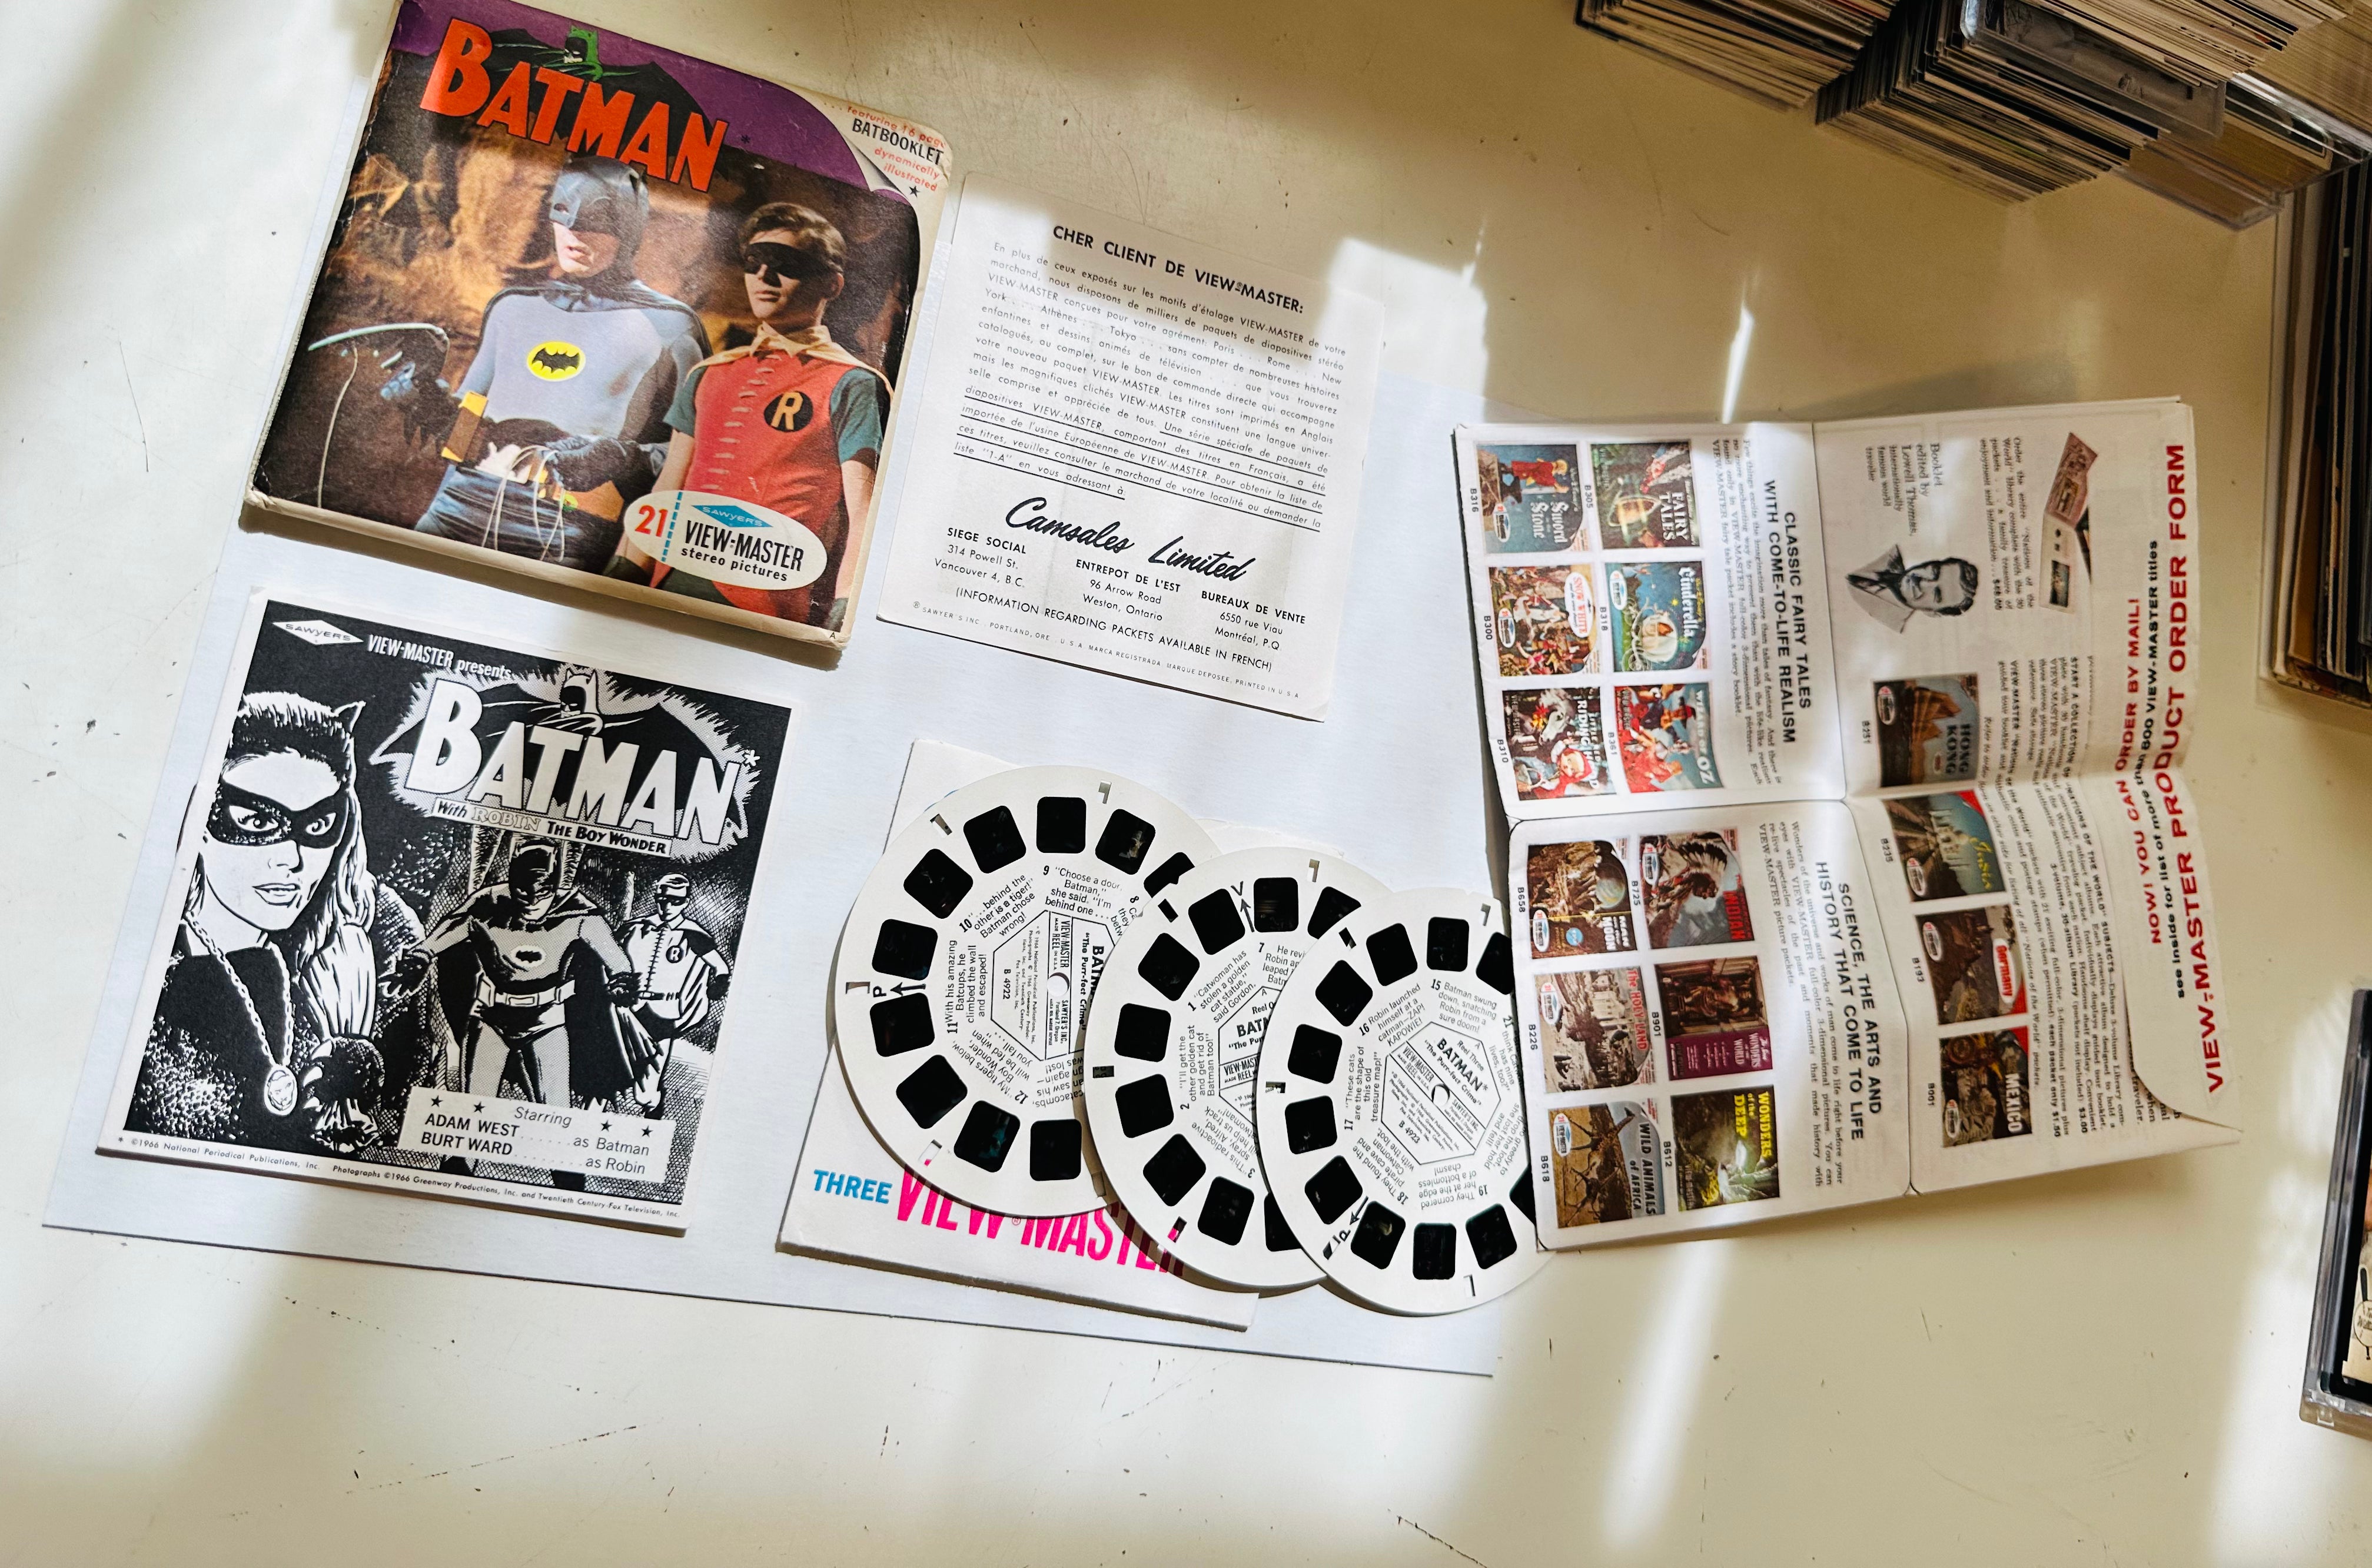 Batman TV series rarer Canadian version View-master 3 reels set with booklet and rare catalog 1966